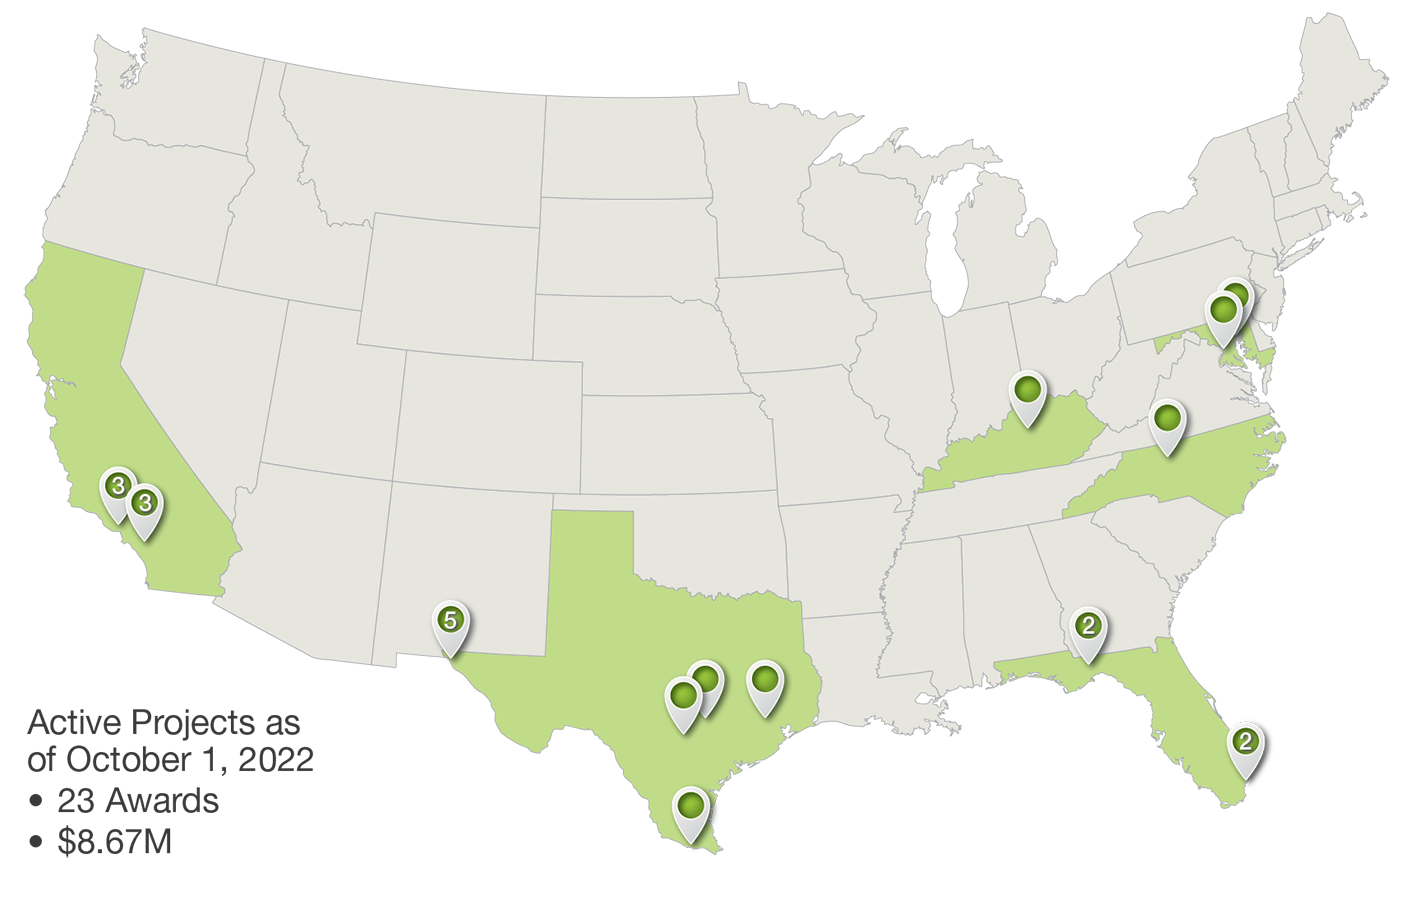 Figure 2. Participating HBCU-MSI States and City Locations